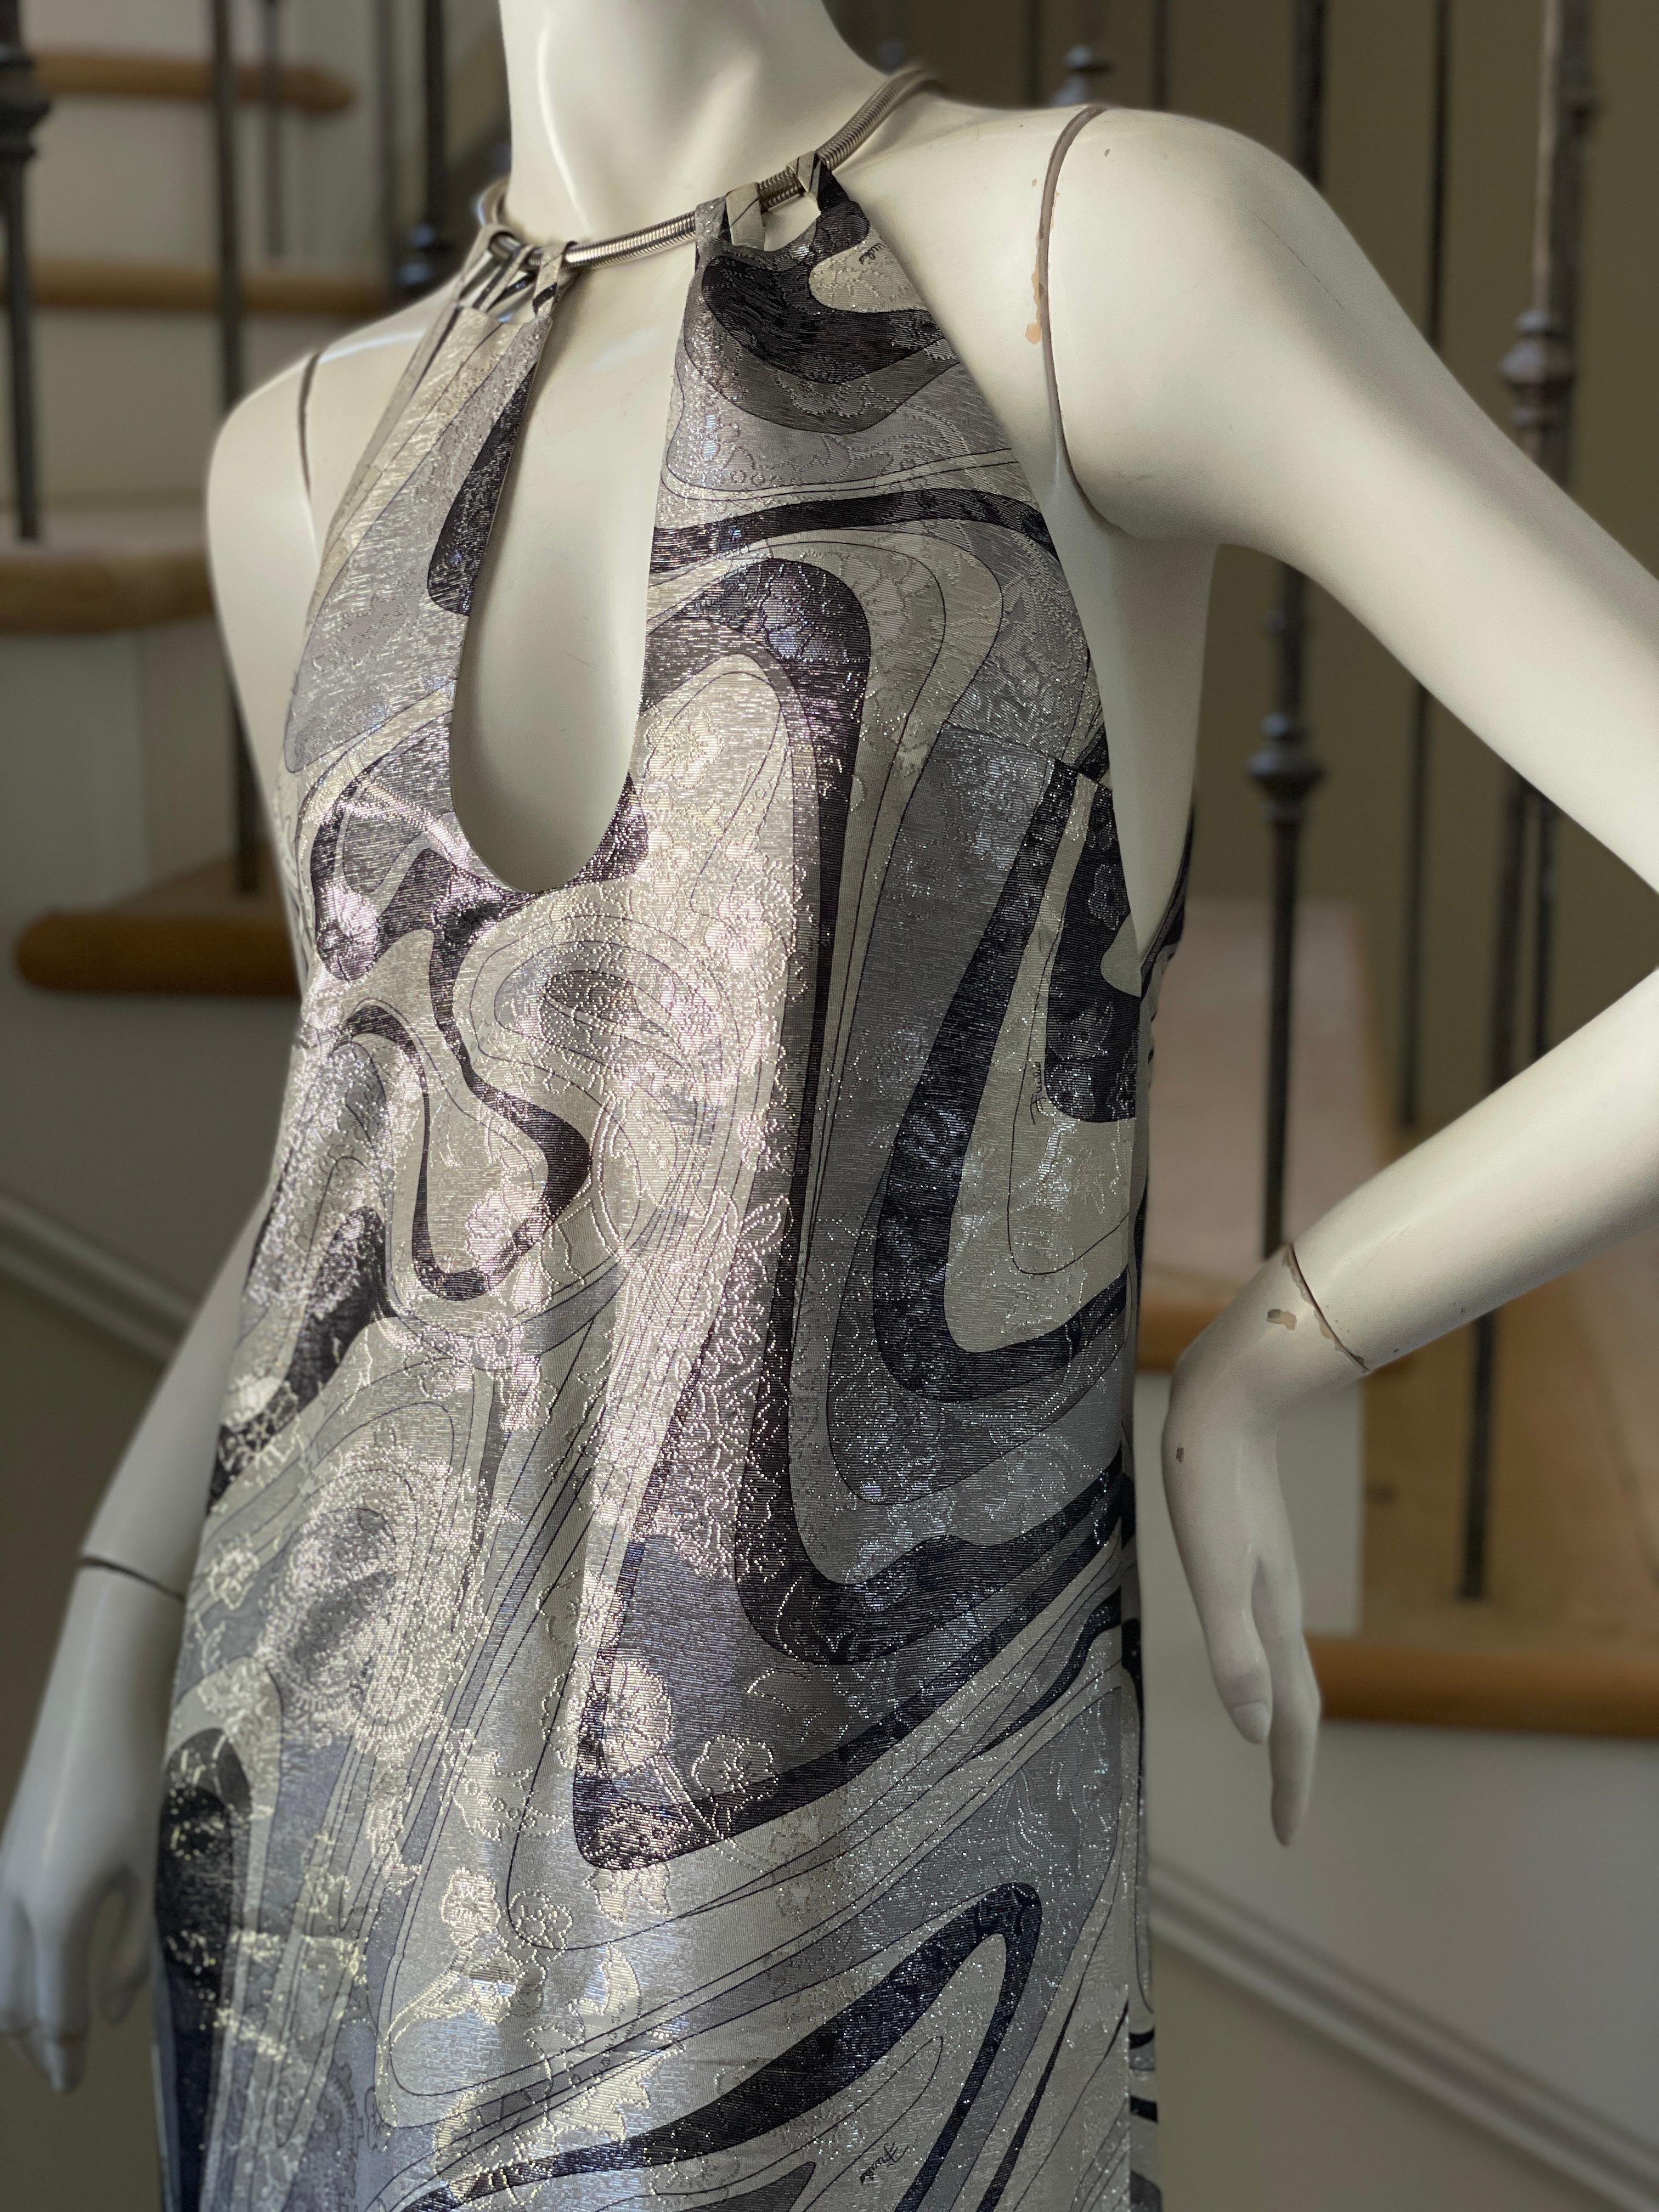 Emilio Pucci Lacroix Era Silver Silk Sixties Style Dress with Snake Chain Collar.
So Edie Sedgewick, please use the zoom feature to see details.
Size 36 It US 8
Bust 34